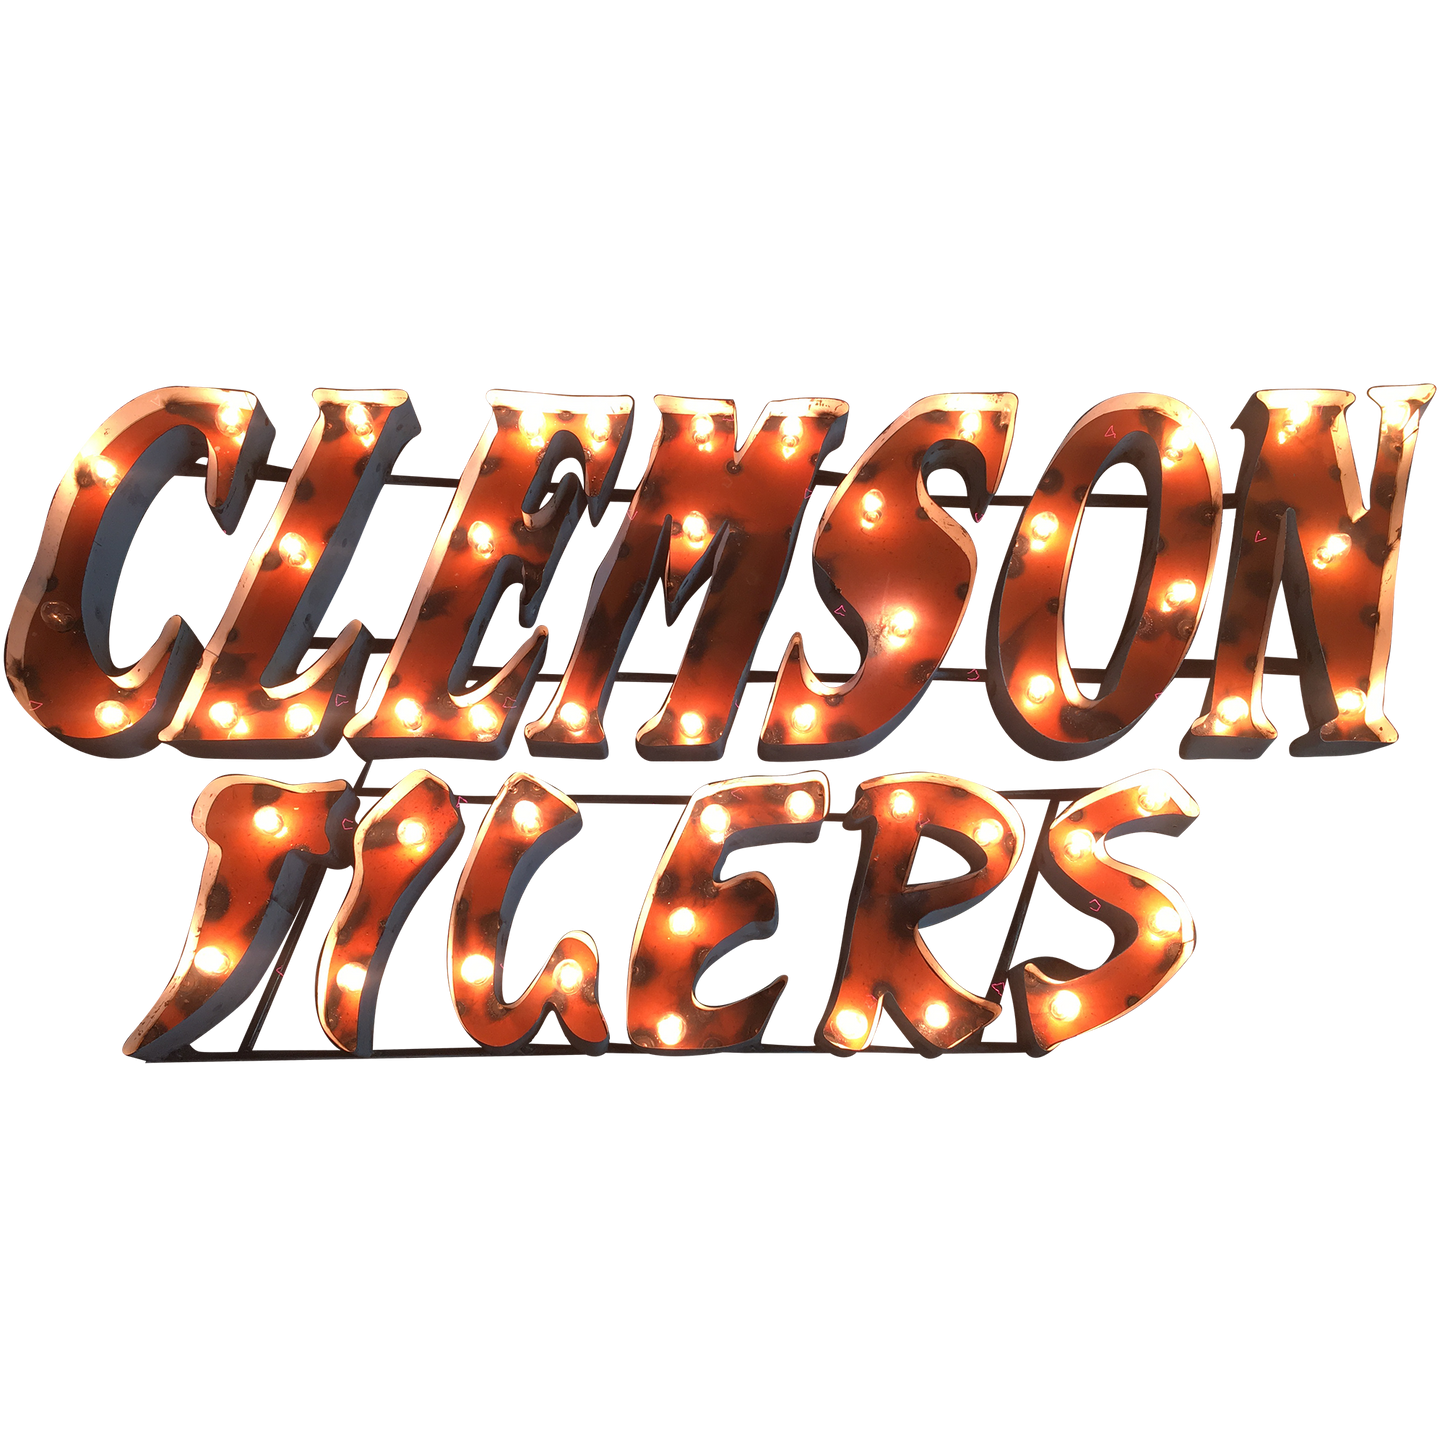 Clemson University "Clemson Tigers" Stacked Lighted Recycled Metal Wall Decor